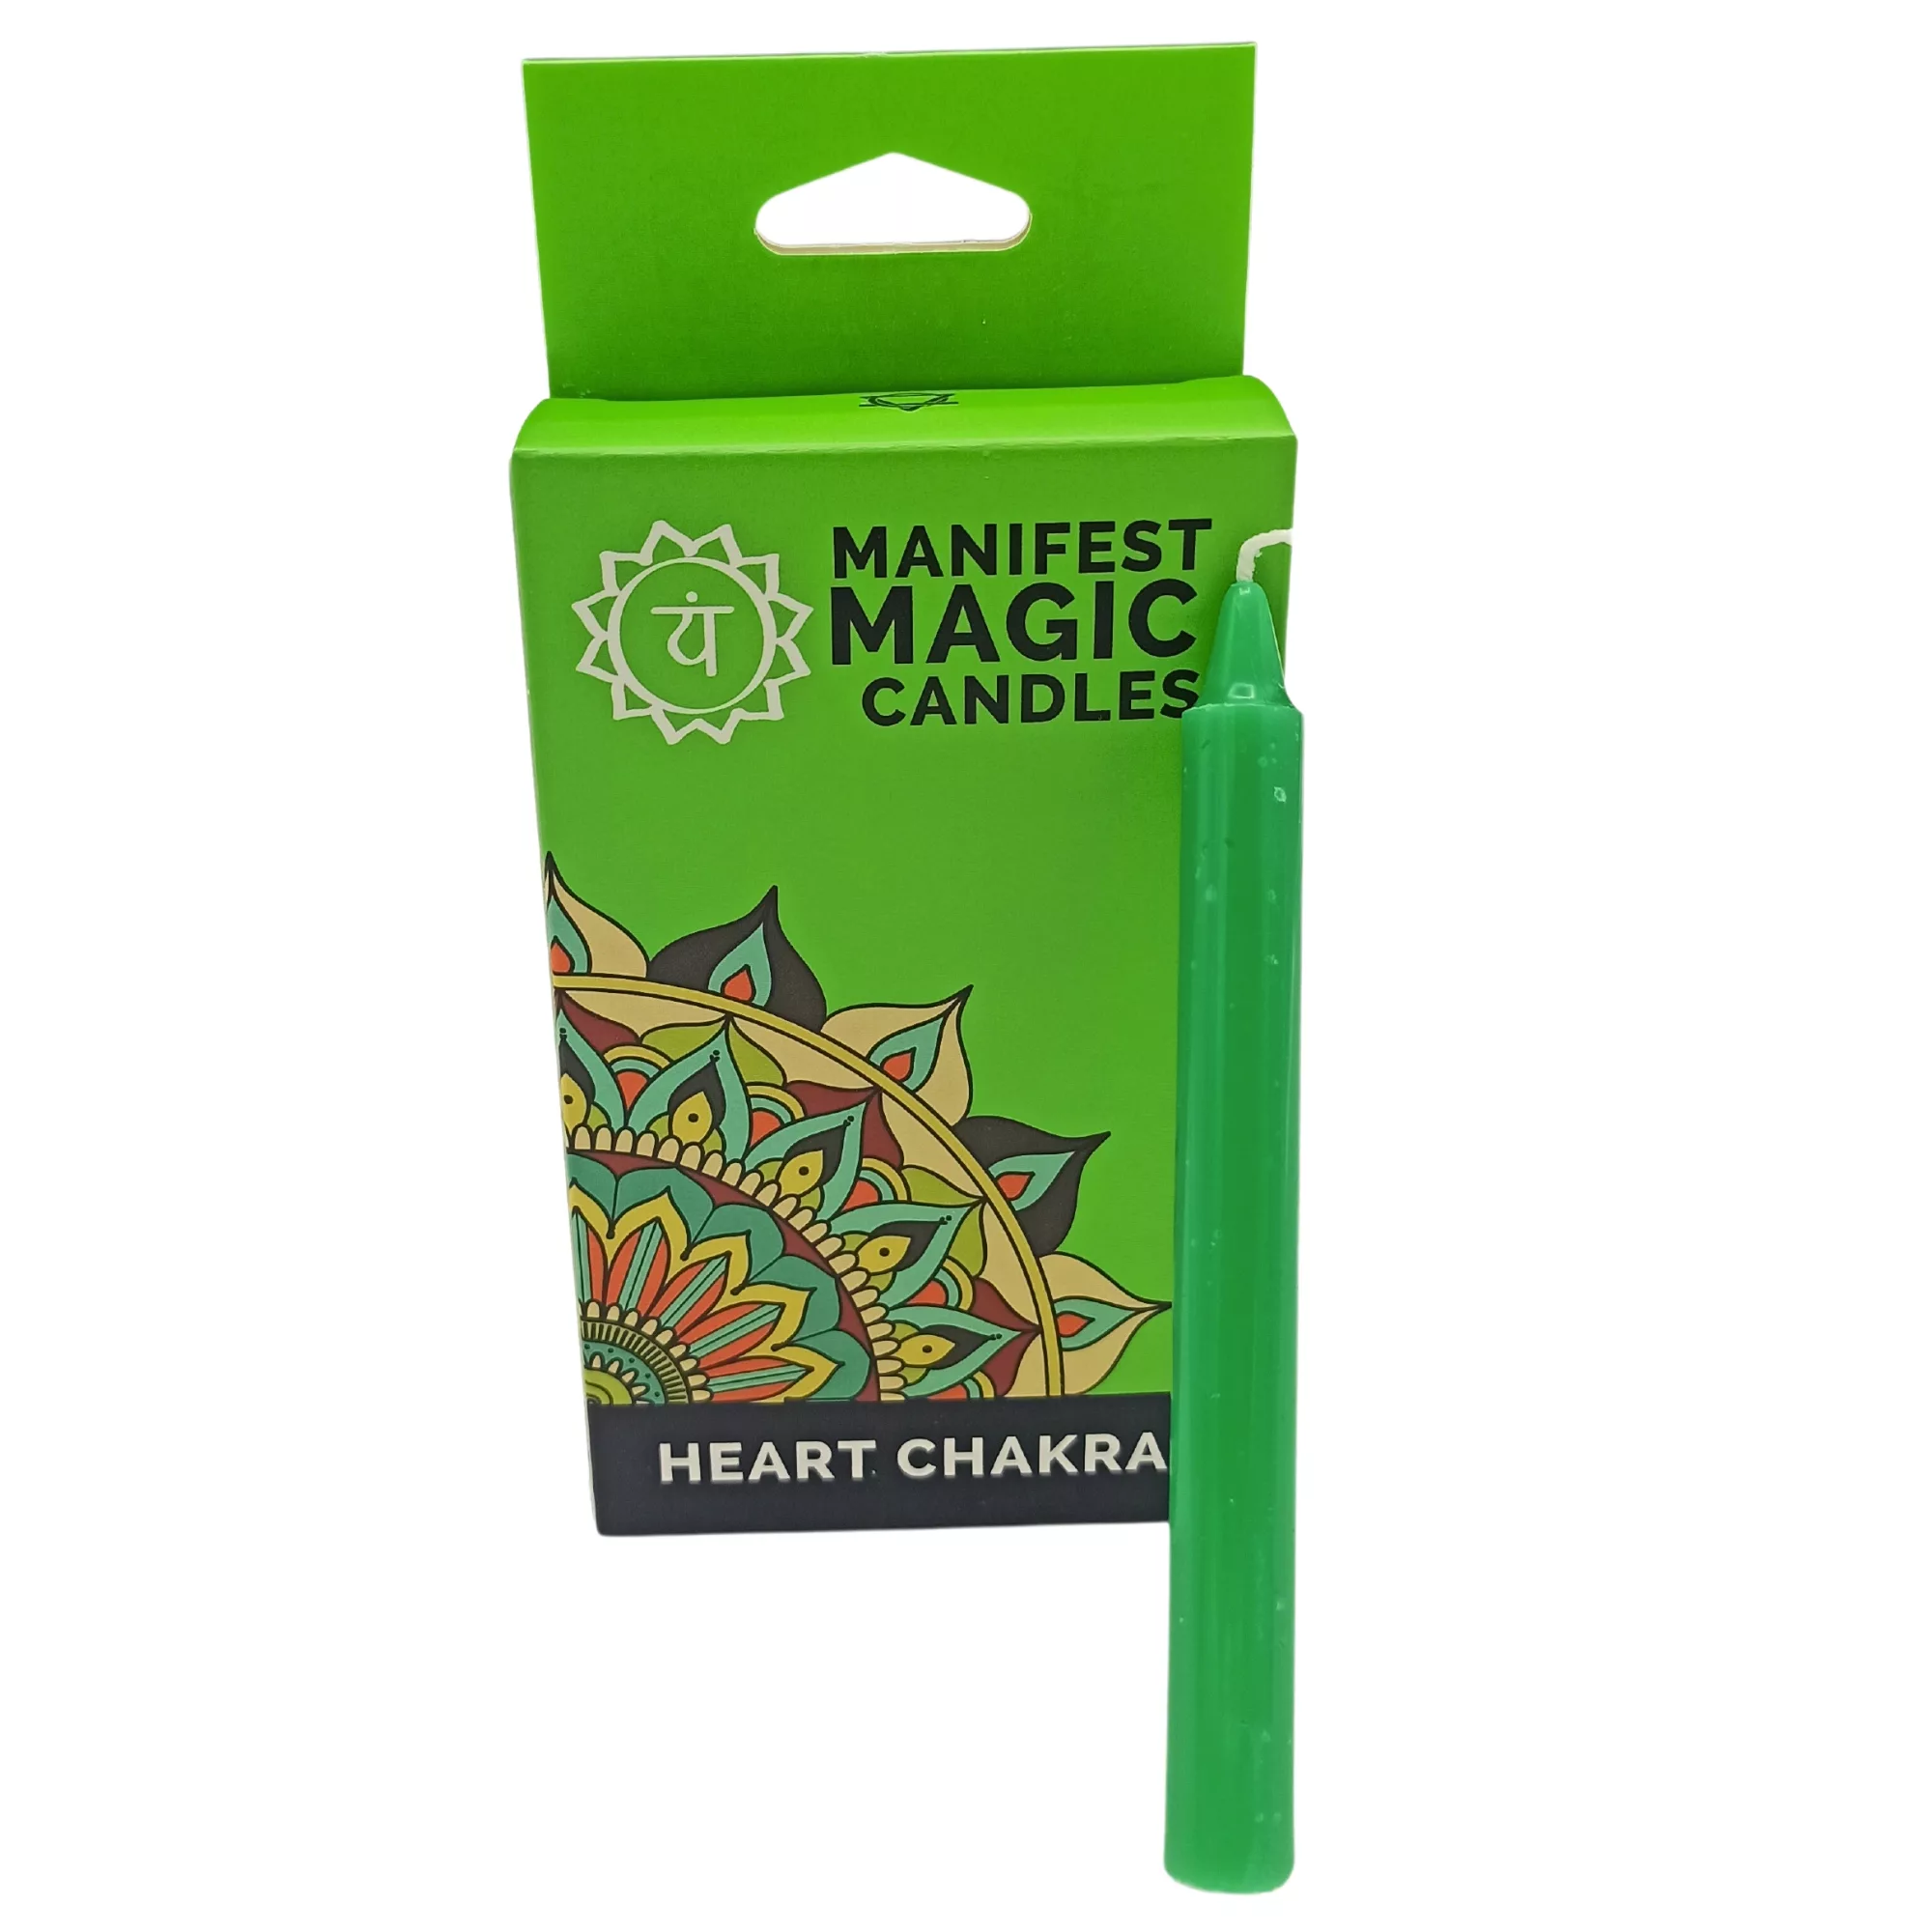 Manifest Magic Candles (pack of 12) – Green – Heart Chakra